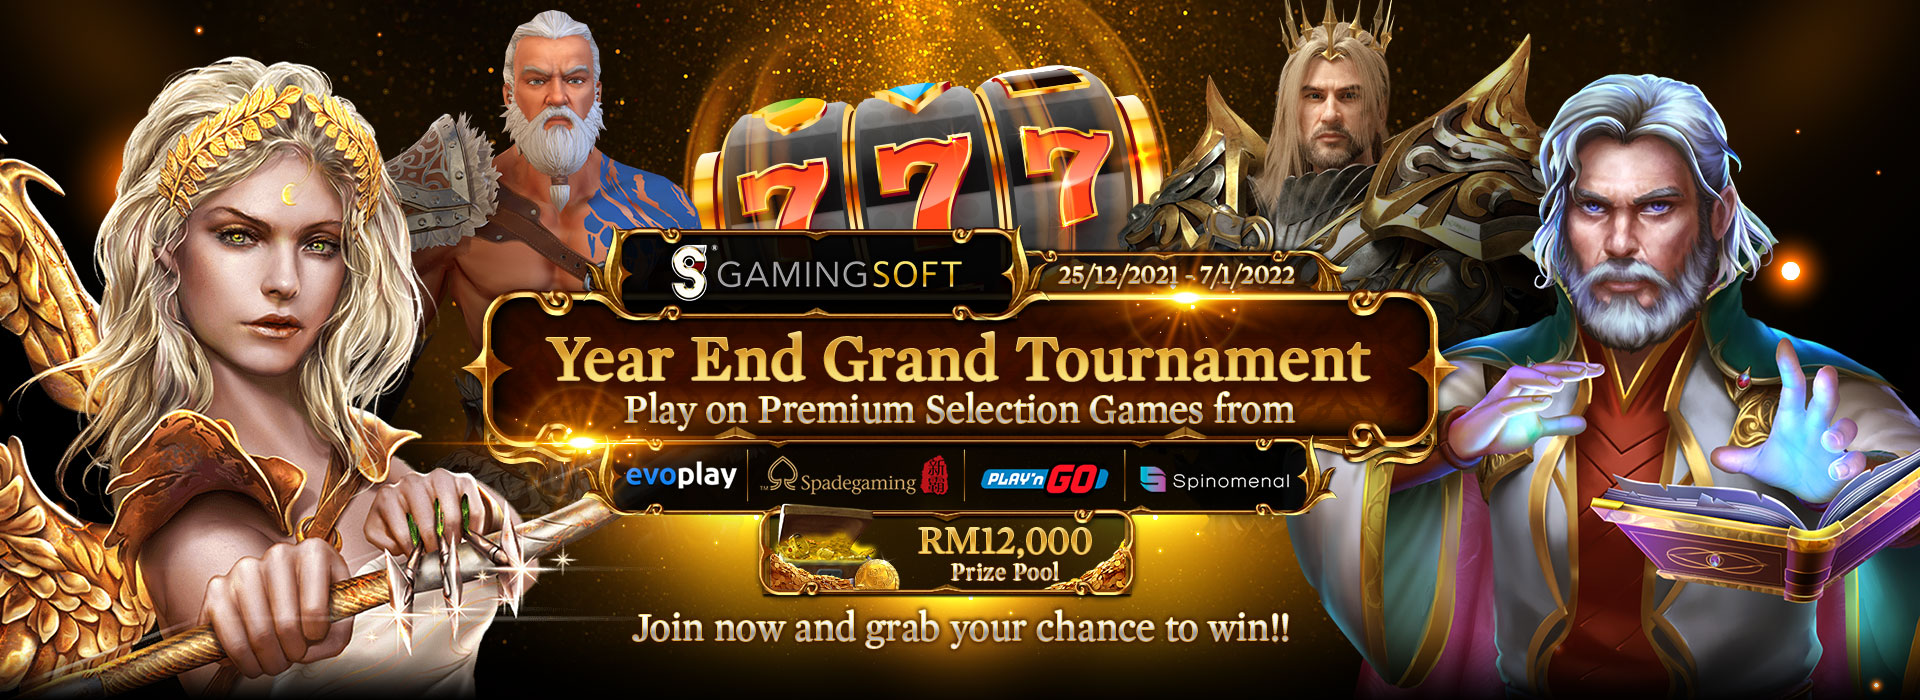 2021 Year End Grand Tournament Web Banner - GamingSoft